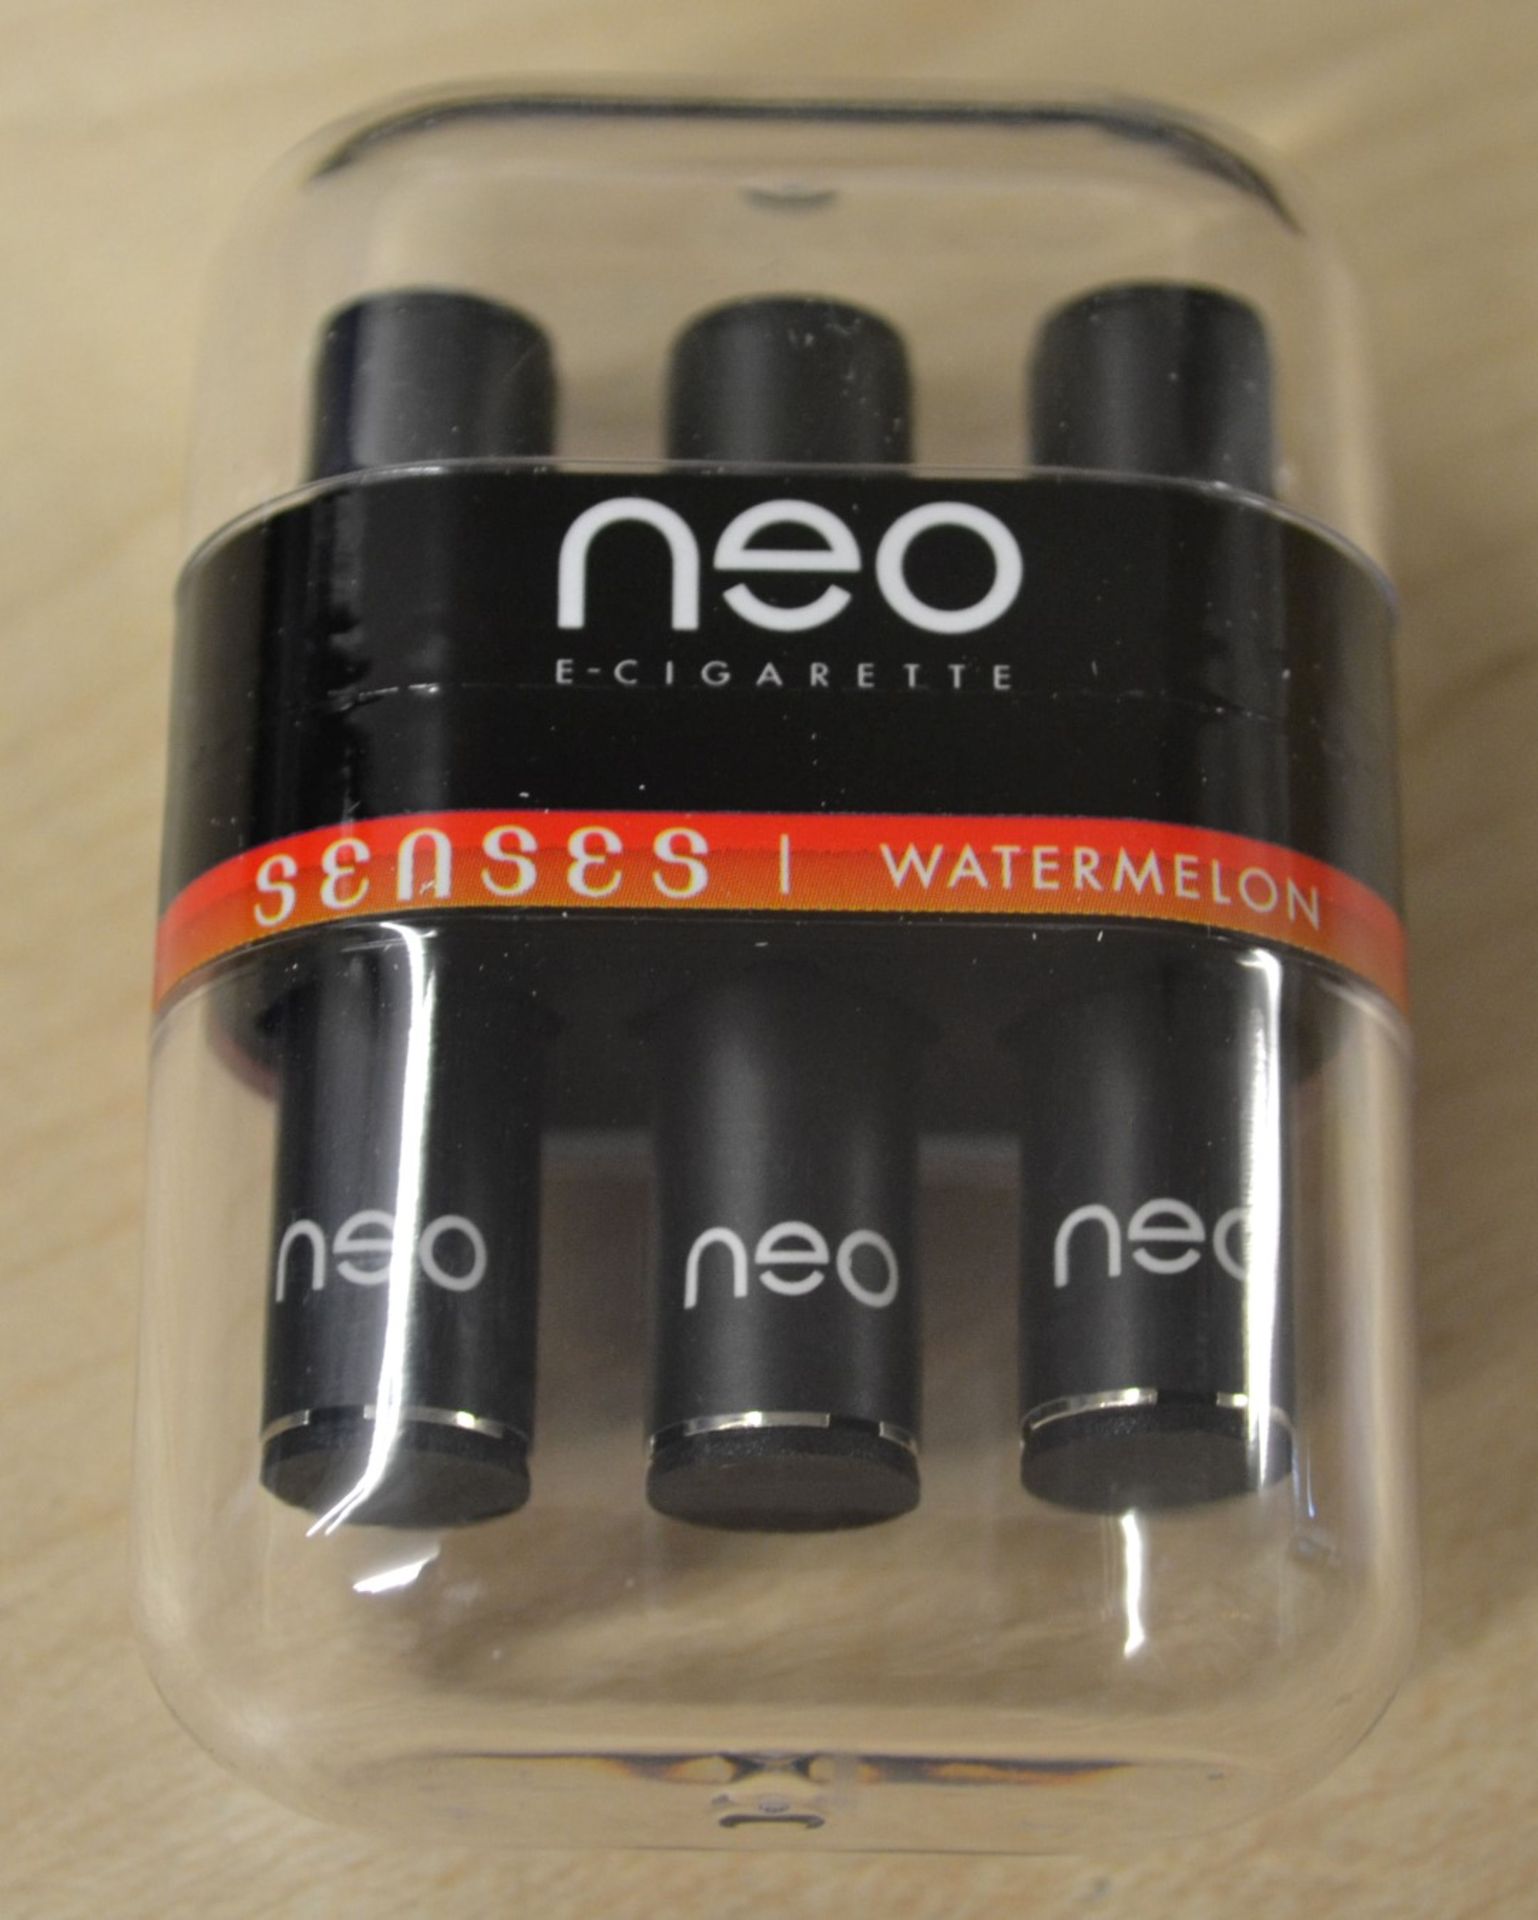 30 x Neo E-Cigarettes Neo Infinity Watermelon Refill Packs - New & Sealed Stock - CL185 - Ref: DRTWM - Image 7 of 9